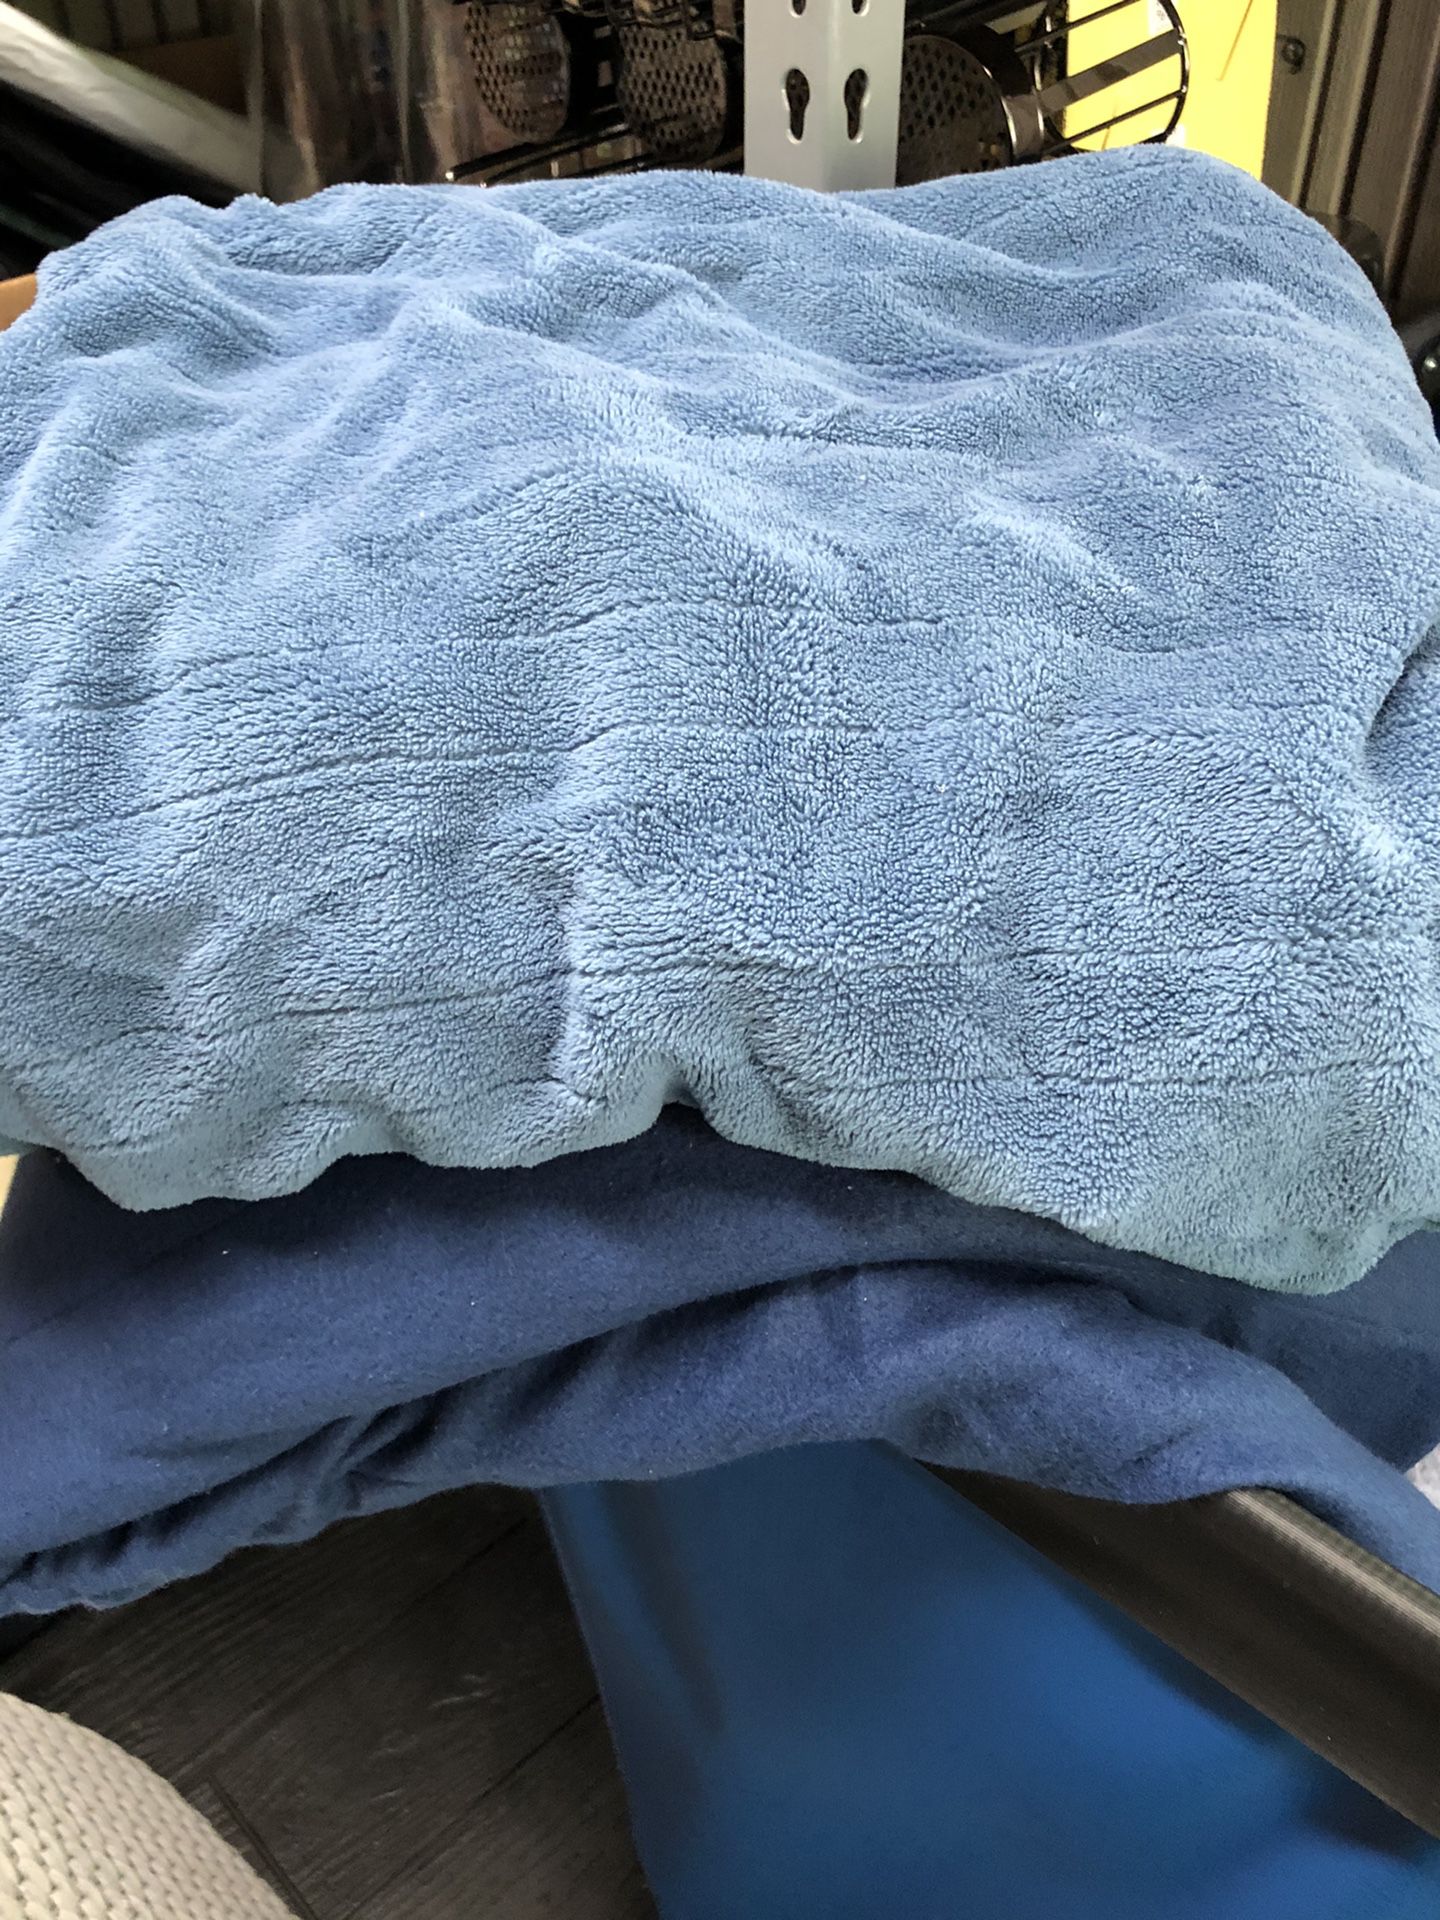 2 Electric Twin Blankets Missing Cords 